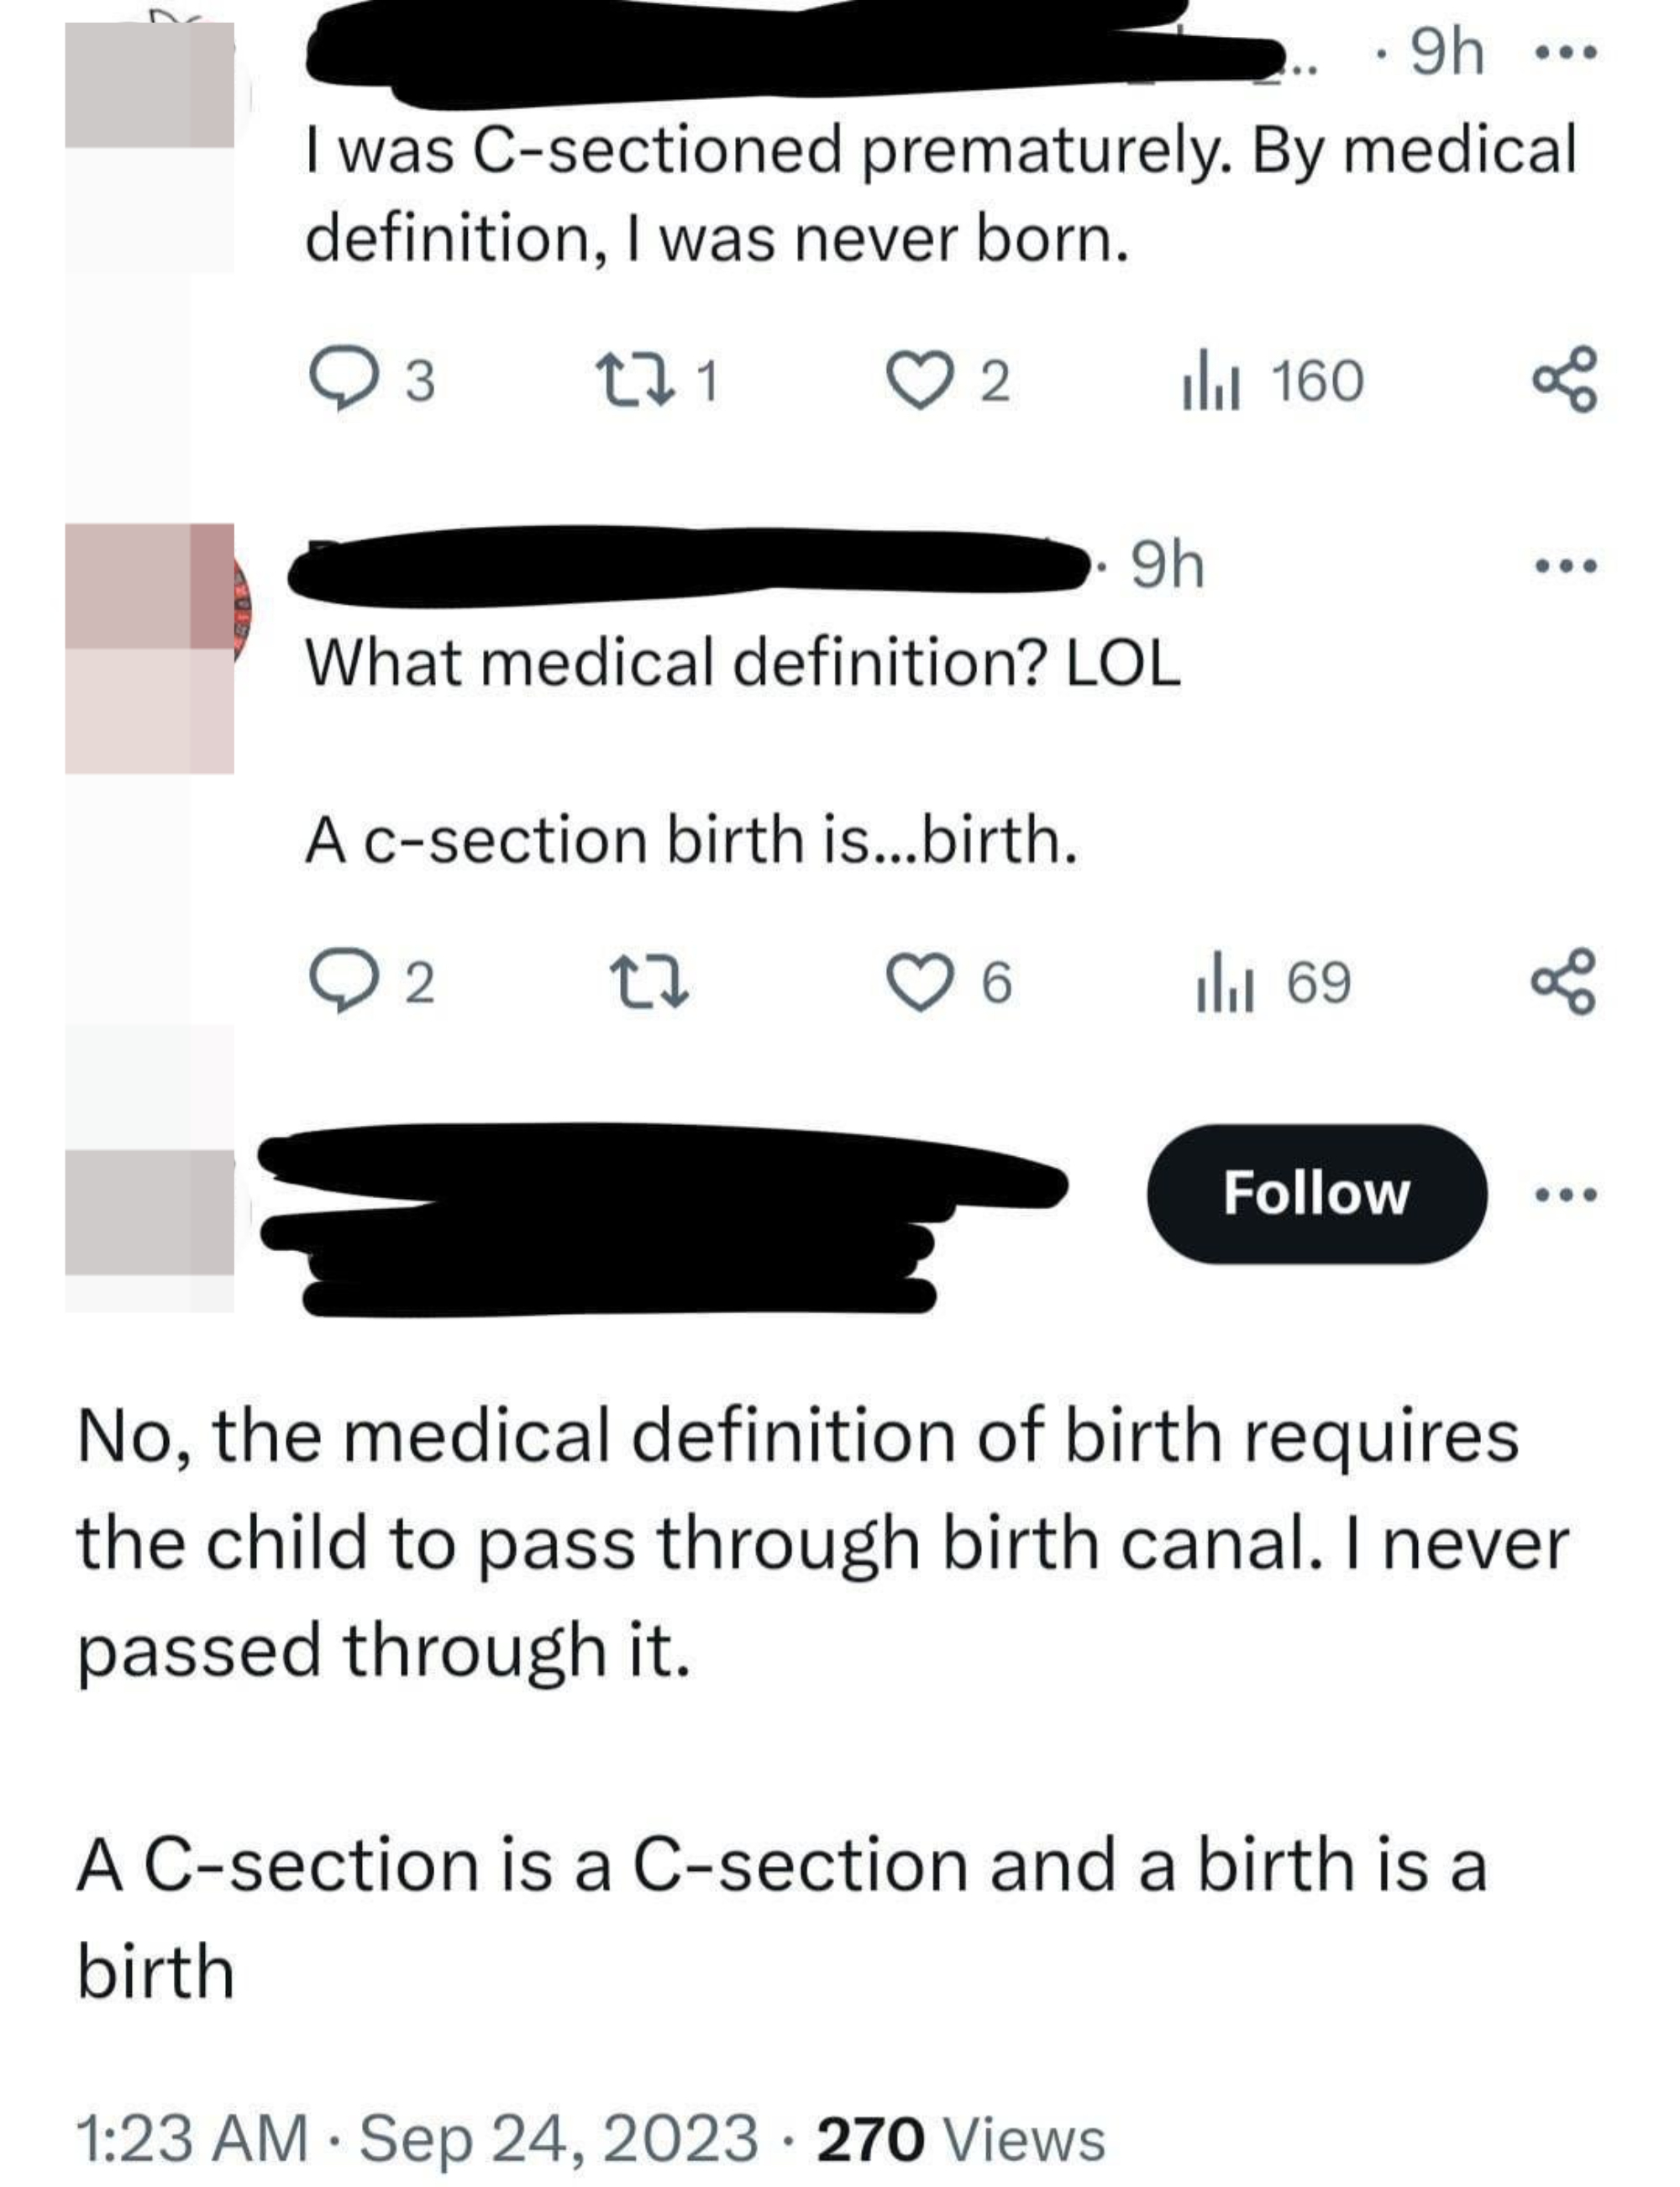 &quot;A C-section is a C-section and a birth is a birth&quot;